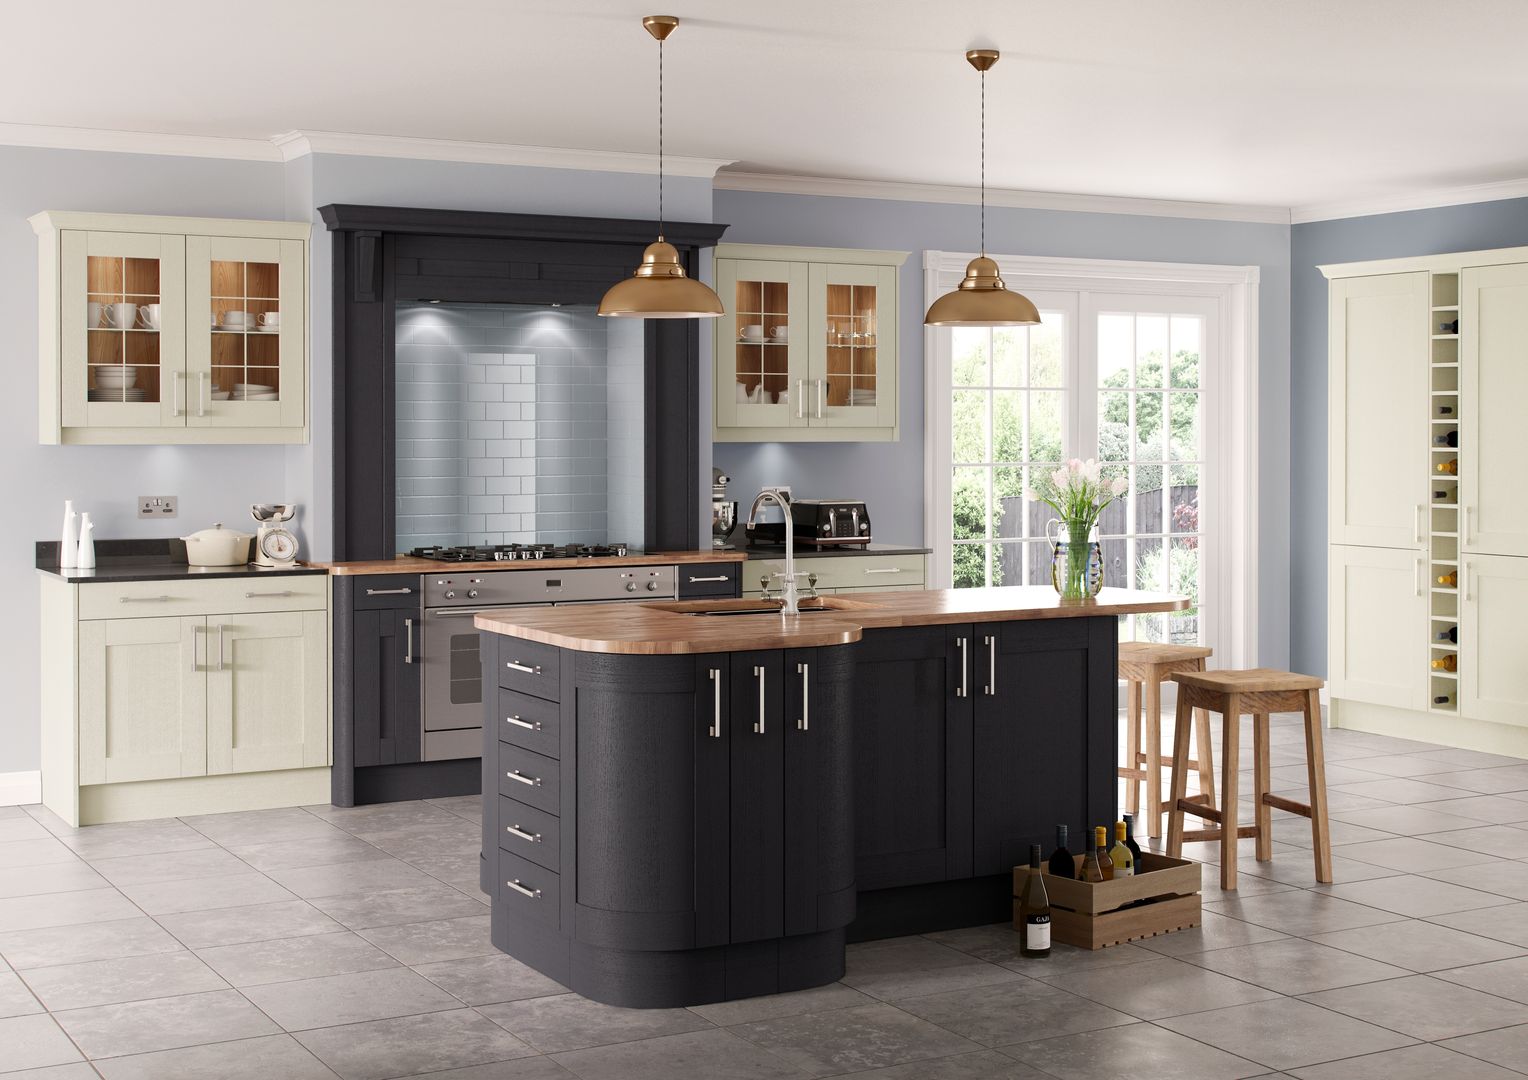 Saltaire Graphite and Ivory Painted Shaker Kitchen Sigma 3 Kitchens Kitchen Cabinets & shelves